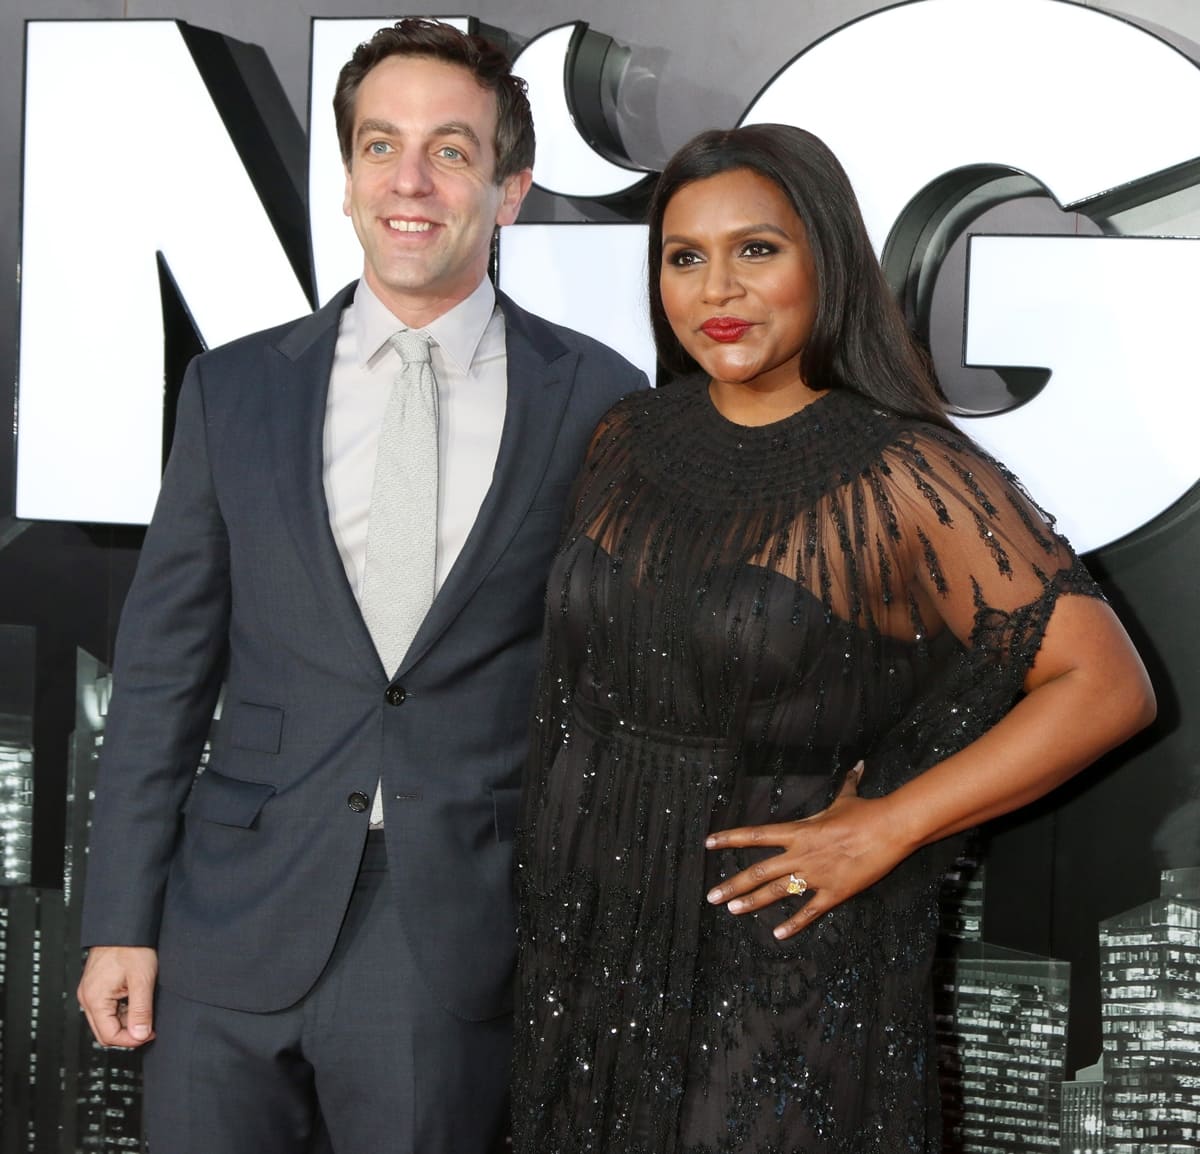 Mindy Kaling and B. J. Novak are good friends and are frequently seen together at red carpet events